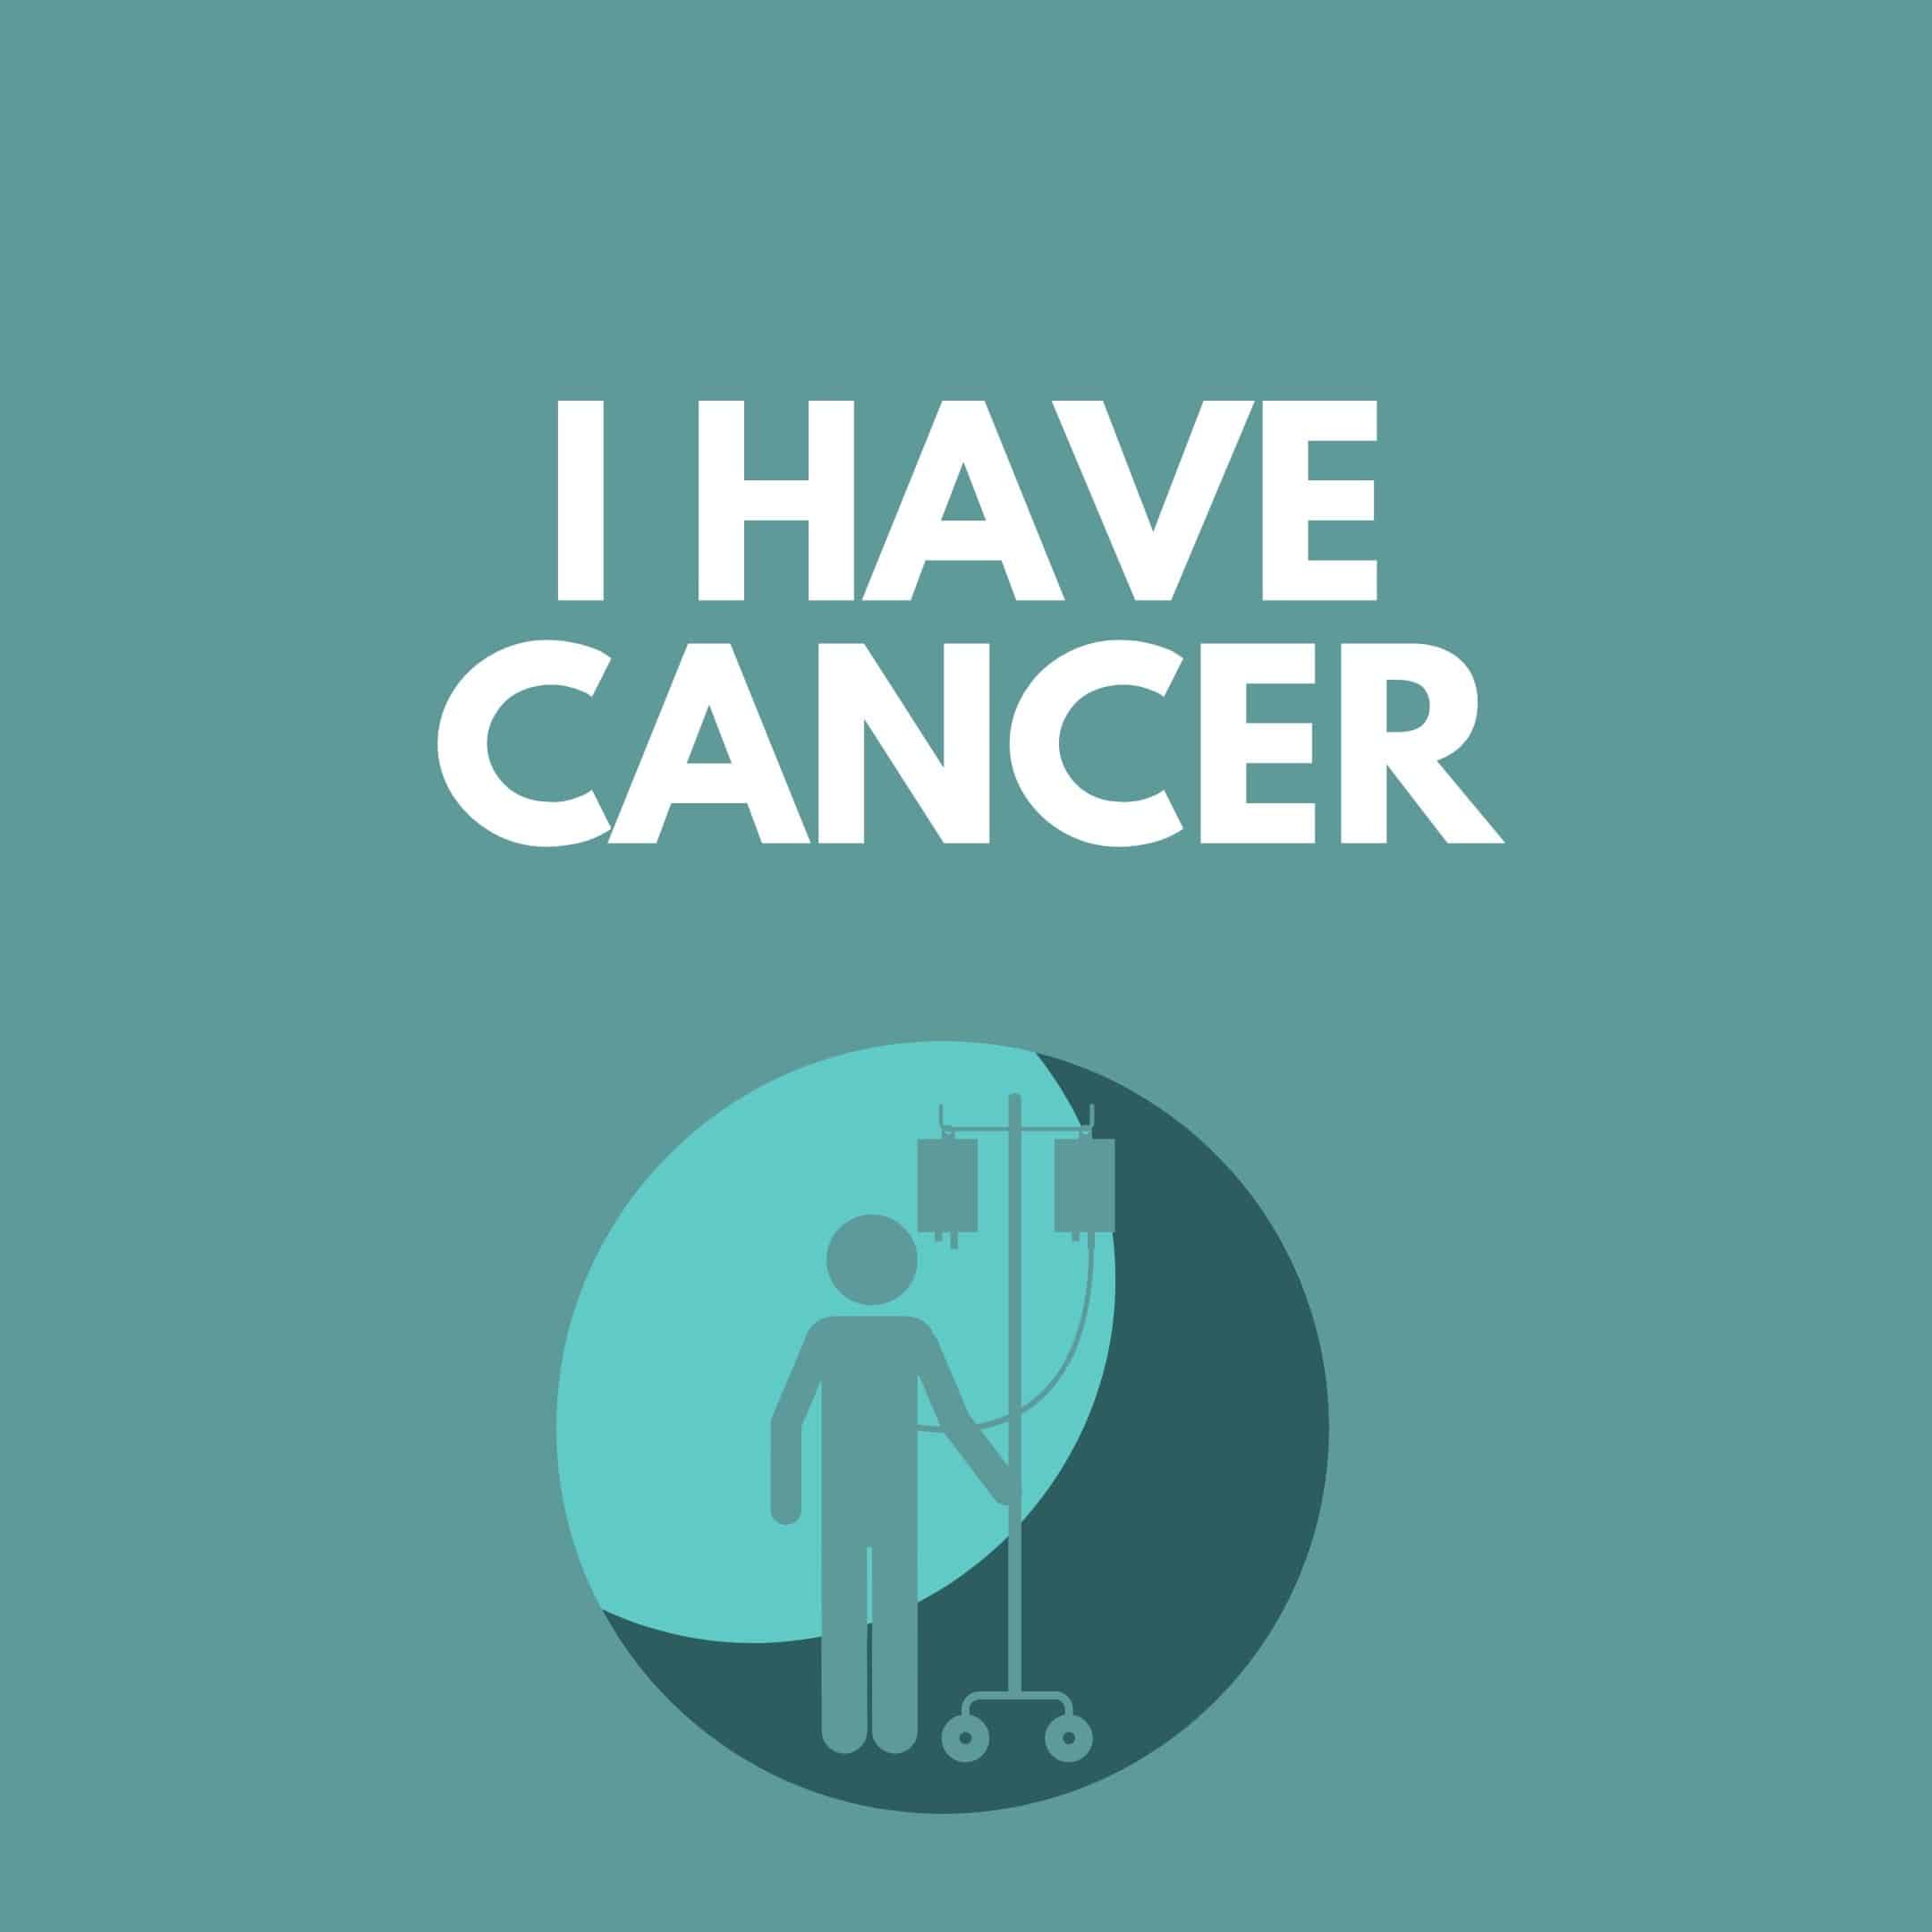 Do cancers have commitment issues?